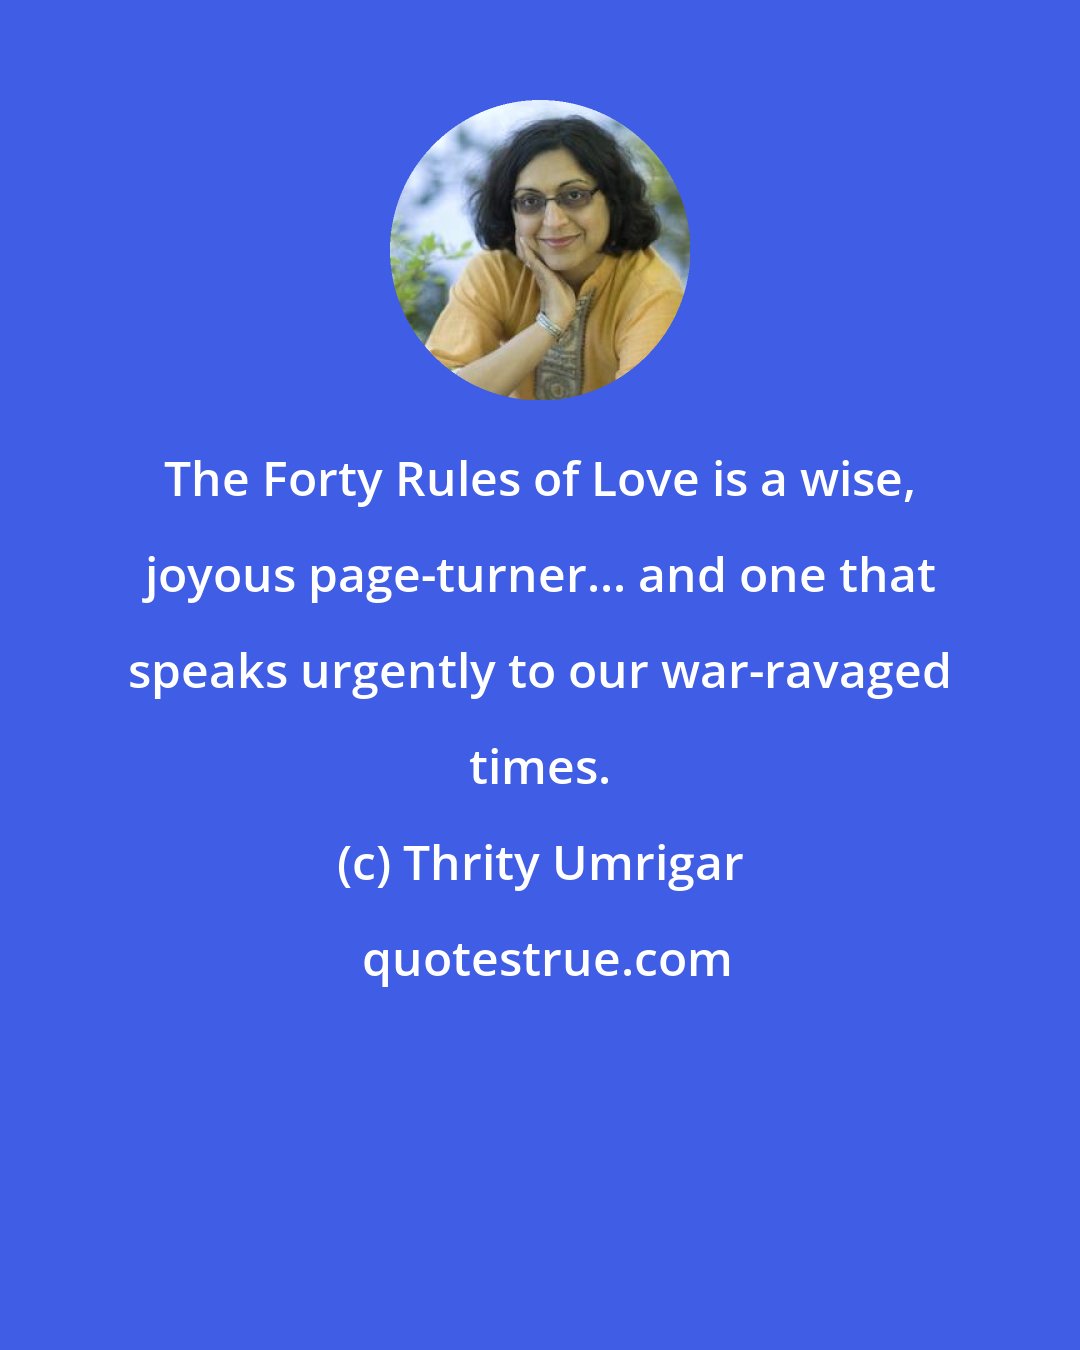 Thrity Umrigar: The Forty Rules of Love is a wise, joyous page-turner... and one that speaks urgently to our war-ravaged times.